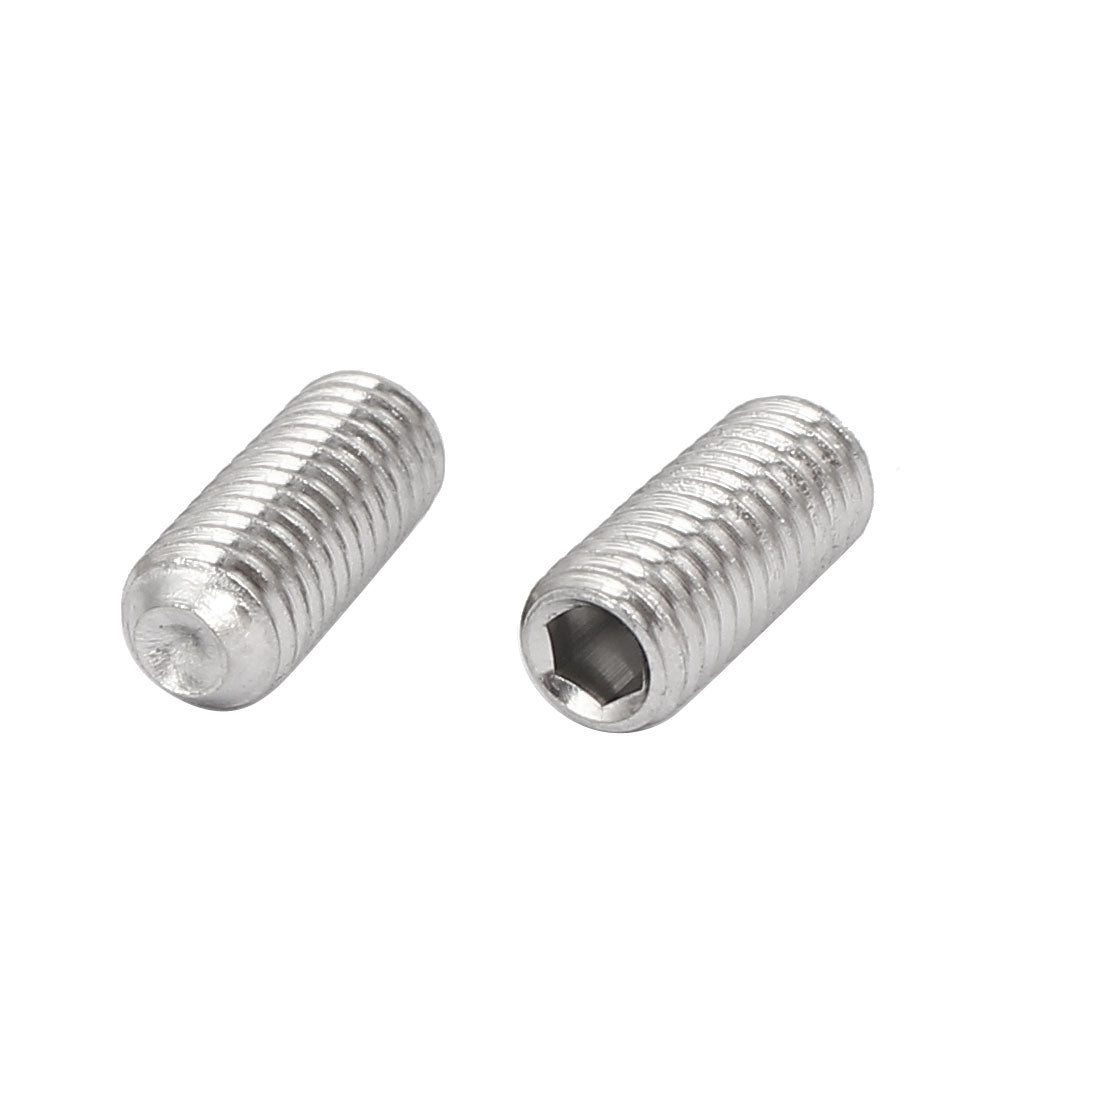 uxcell Uxcell M5x12mm 316 Stainless Steel Hex Socket Cup Point Grub Set Screws 40pcs